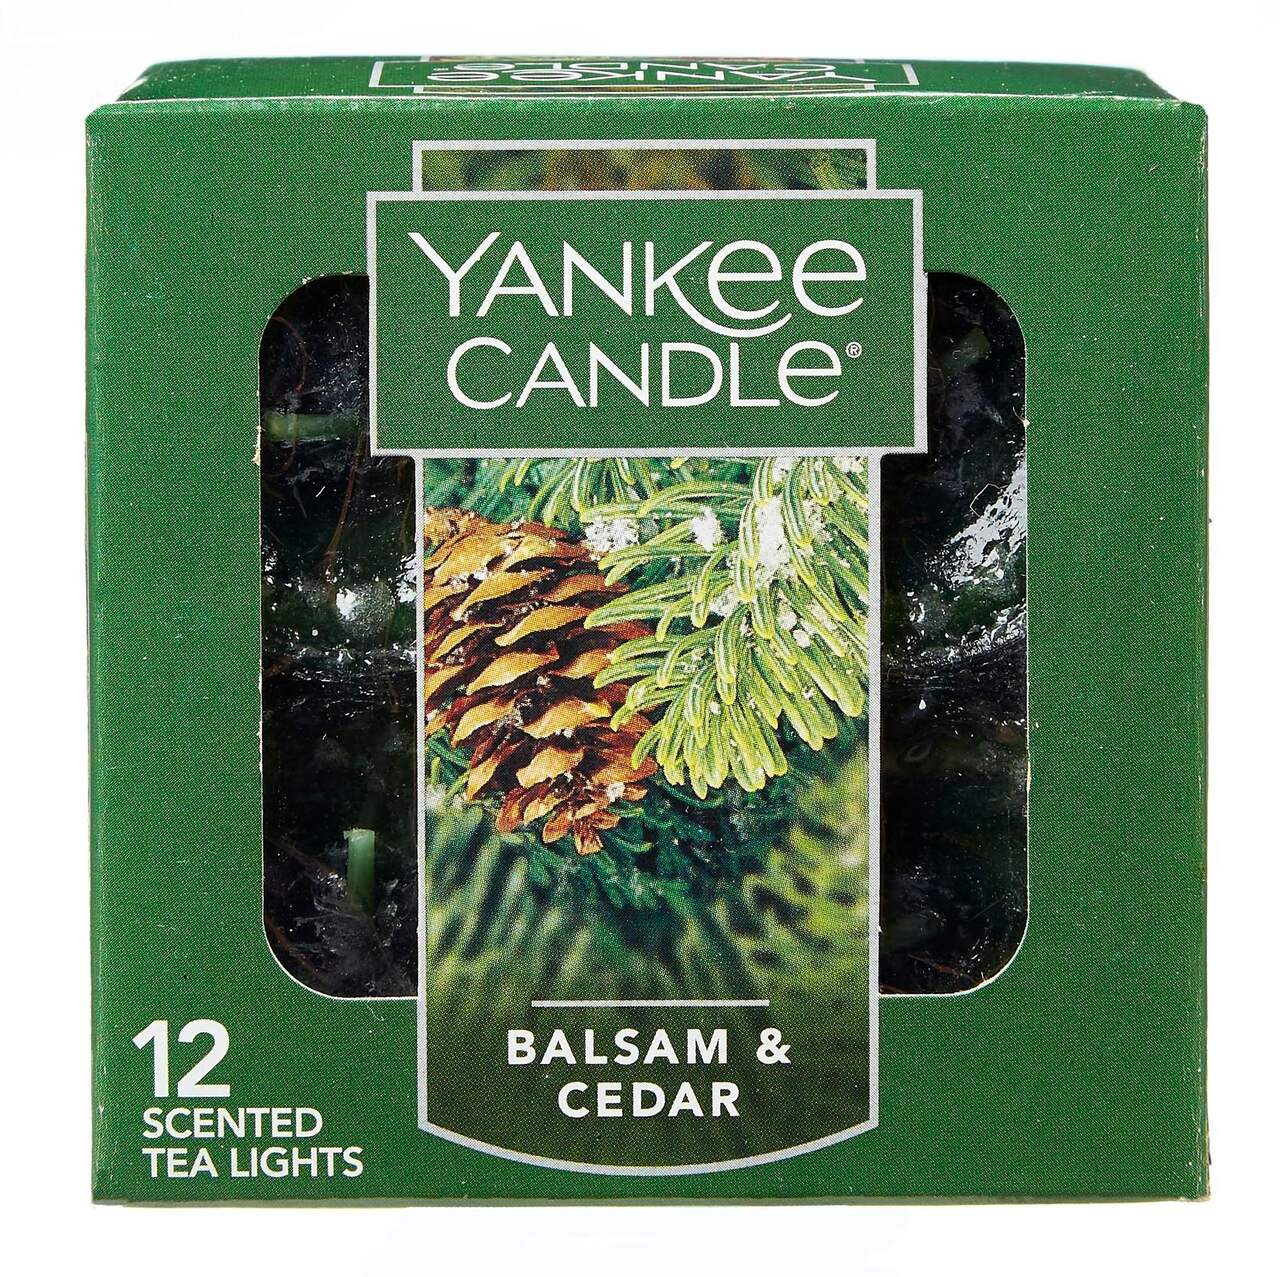 2 PACK Yankee Candle Balsam & Cedar Scent Whole House Filter Pad Air  Freshener